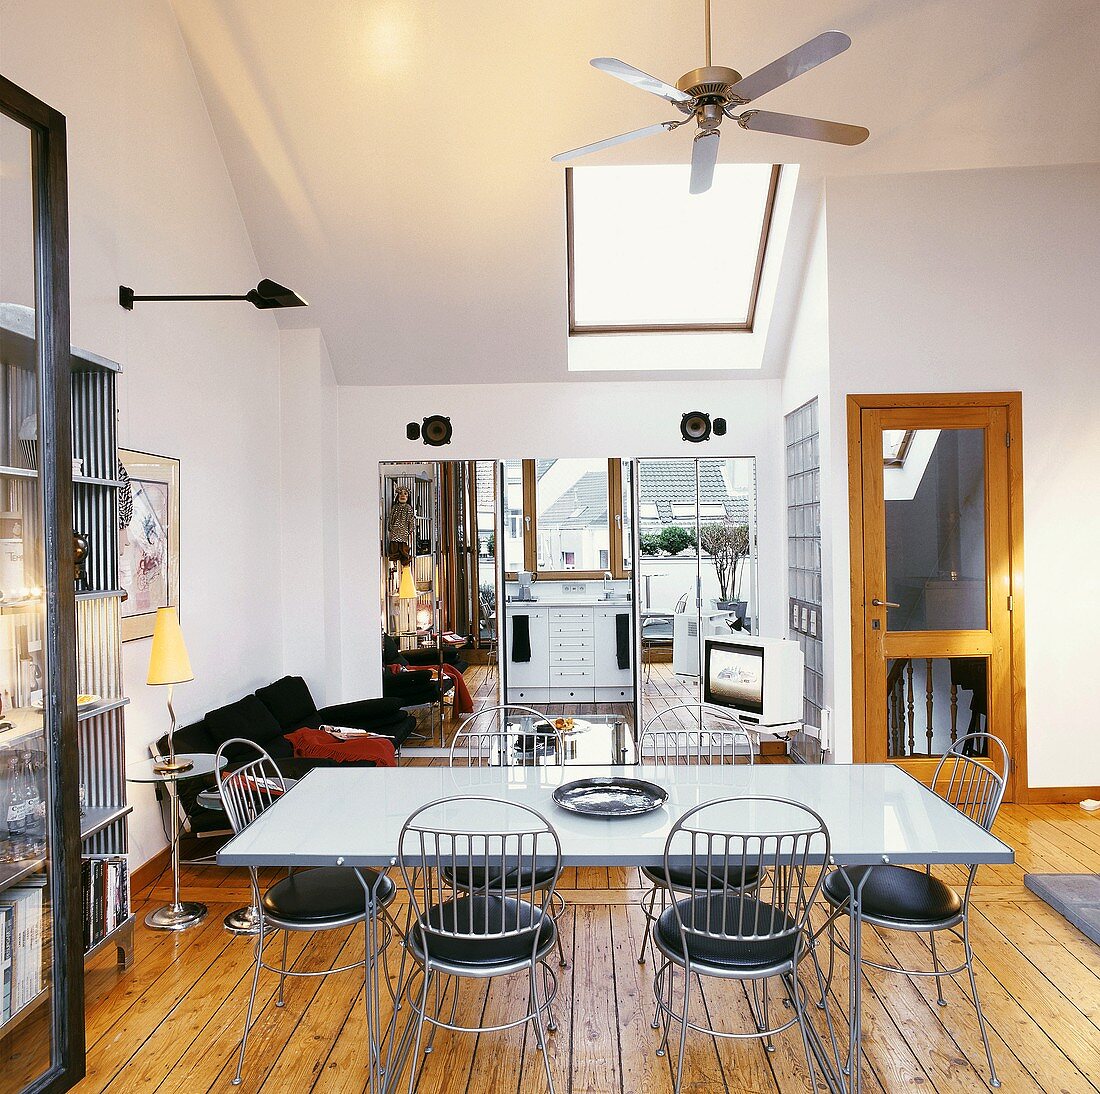 Dining room with ceiling fan above metal table and chairs; two cupboards with mirrored fronts flanking kitchen doorway